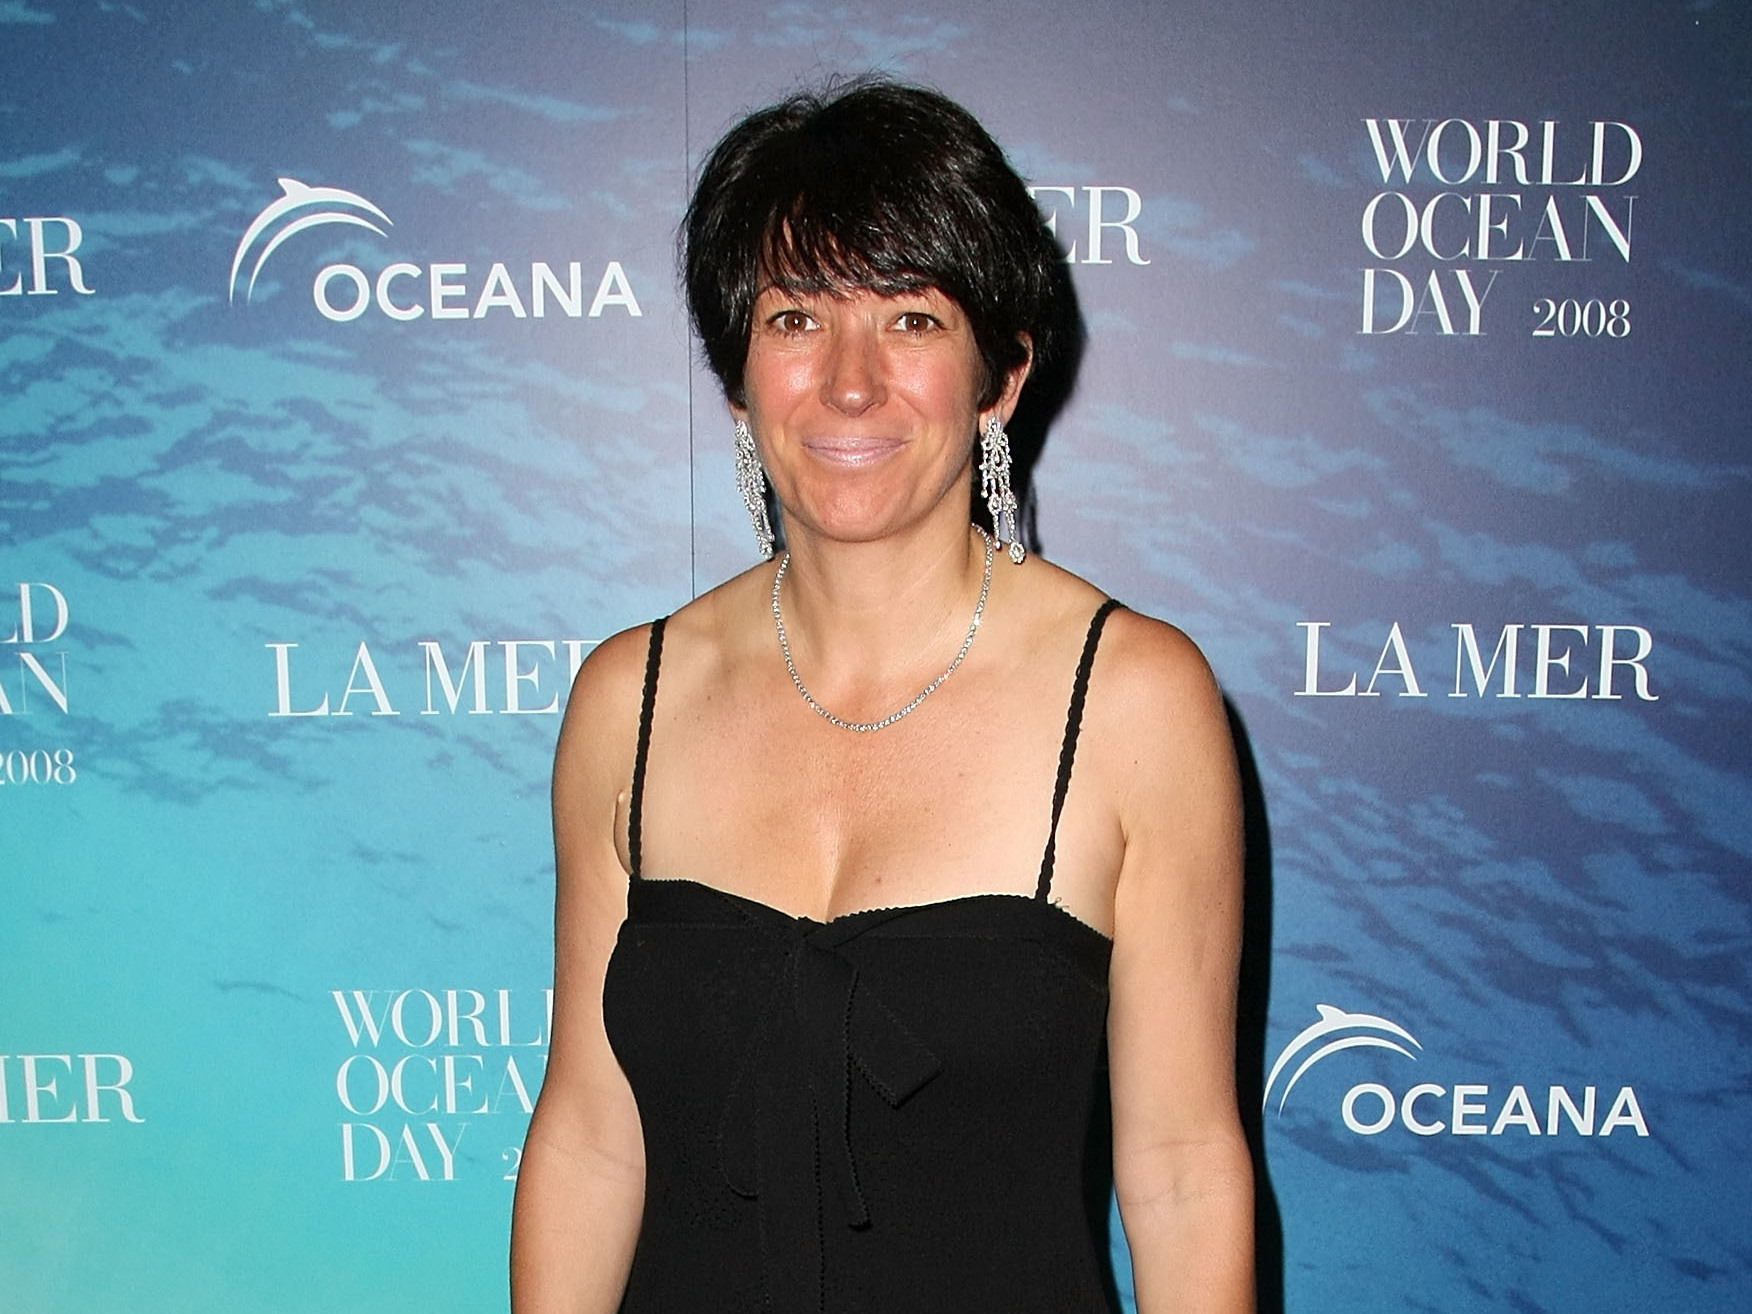 Ghislaine Maxwell to receive treatment for her “trauma” while in prison